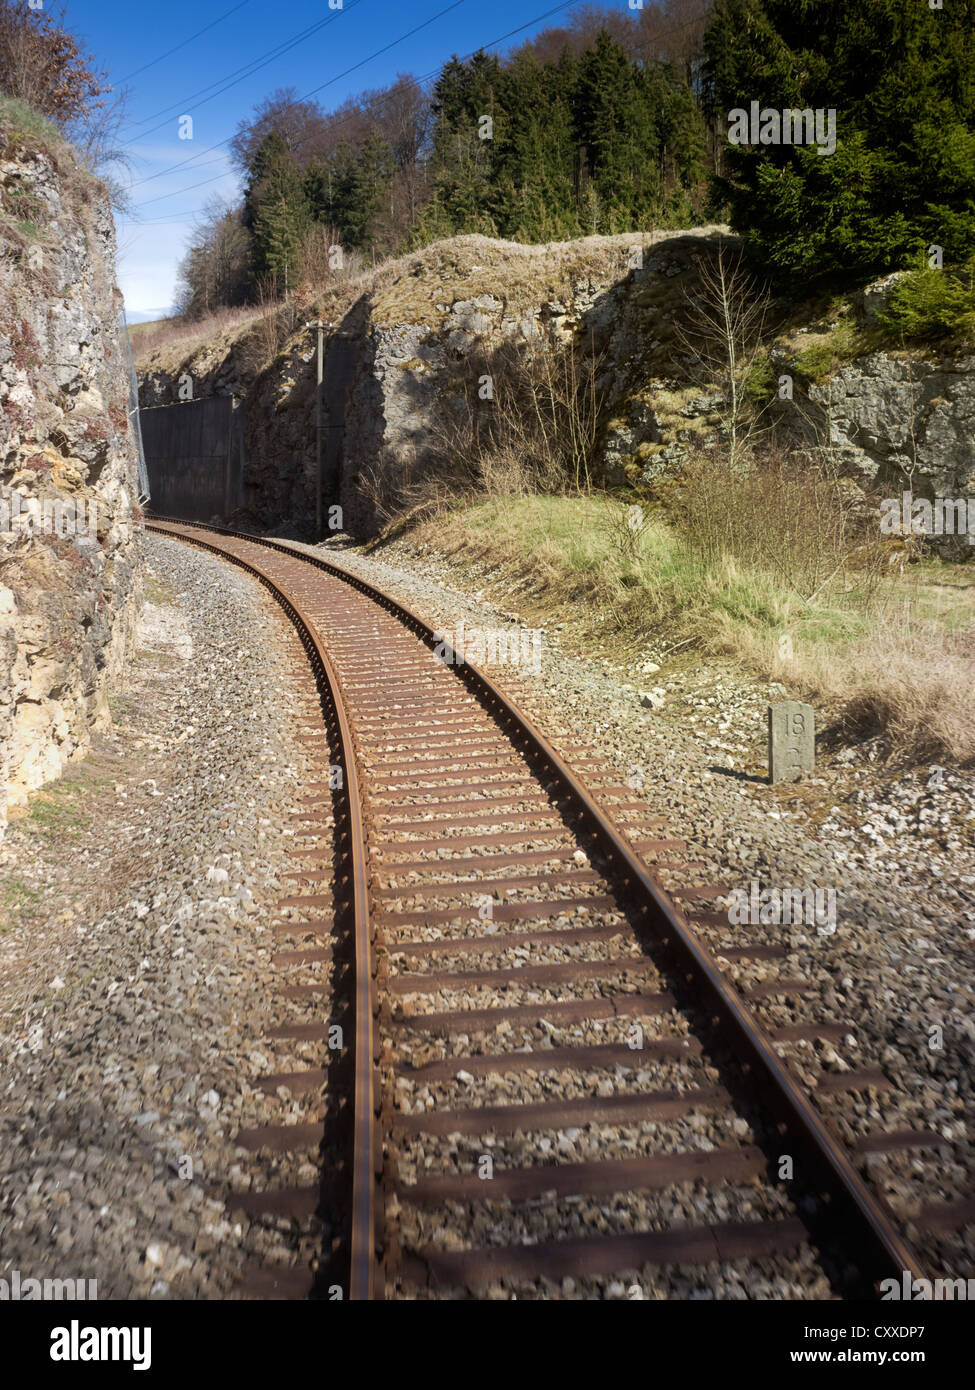 Canyon route, route of the Swabian Jura Railway, SAB, from Gammertingen to  Muensingen, seen from the train driver's point of Stock Photo - Alamy